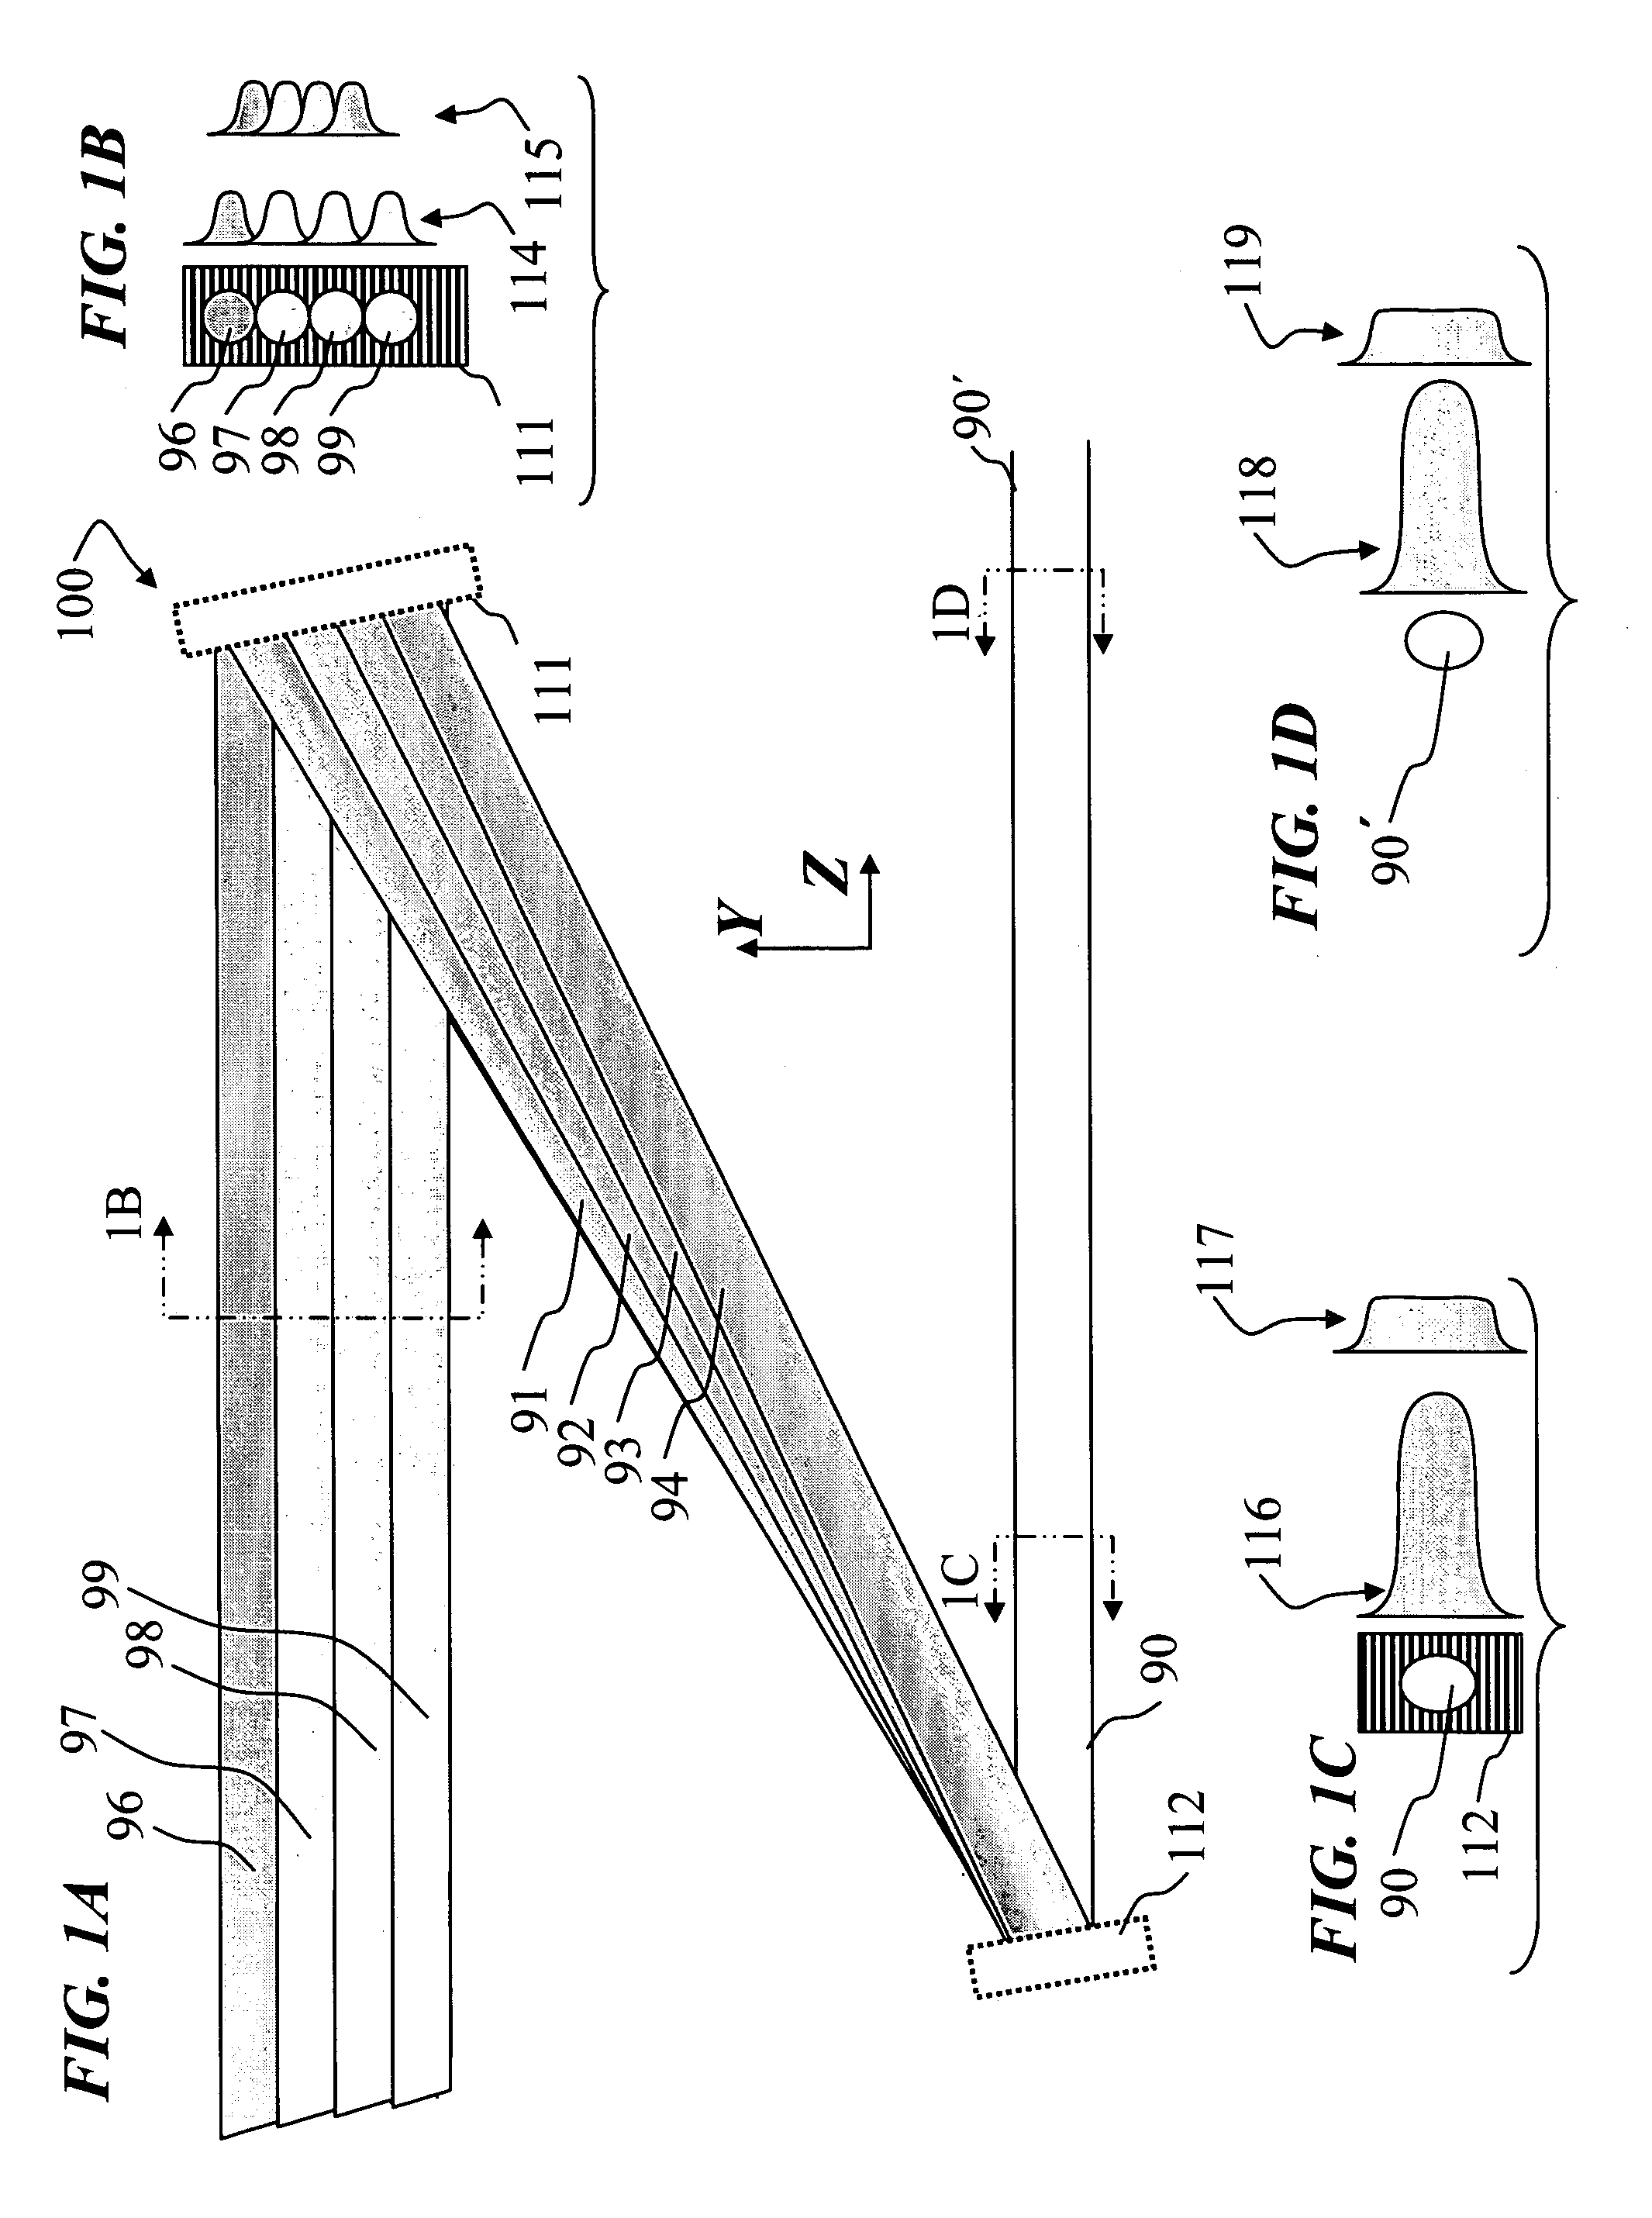 Apparatus and method for spectral-beam combining of high-power fiber lasers